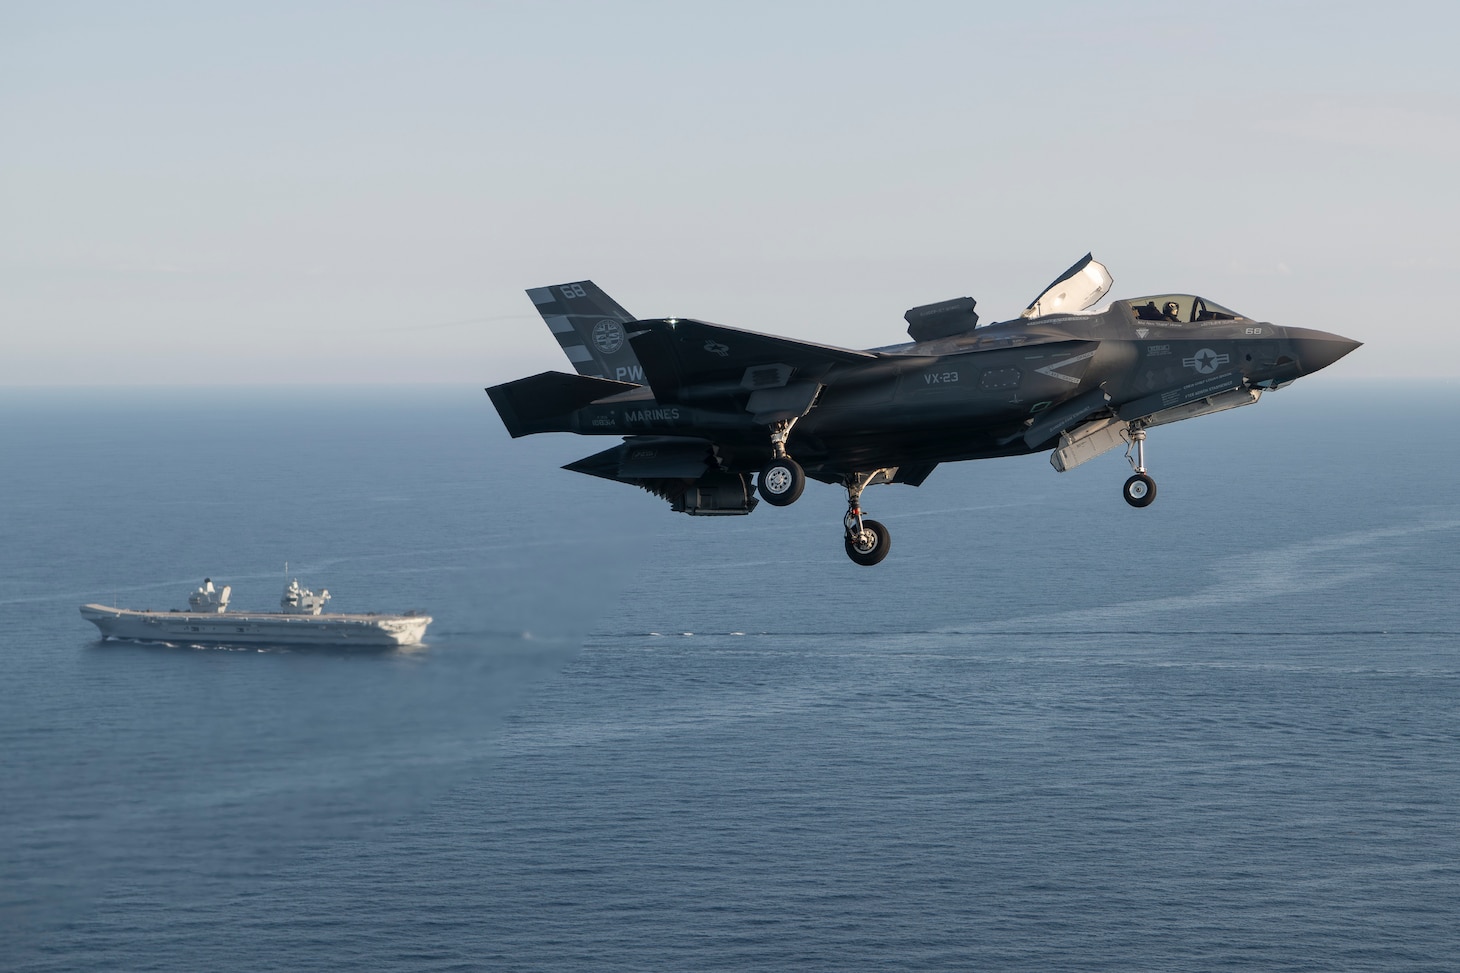 BF-18 Flt 575, USMC Test pilot, Maj Paul Gucwa from Air Test and Evaluation Squadron 23 (VX-23) flies an F-35B aboard HMS Prince of Wales in support of the final First of Class sea trials for F-35B test (DT-3) on 11 October 2023.

The U.K. Queen Elizabeth-class (QEC) aircraft carrier HMS Prince of Wales (R09)’s participation in WESTLANT 23 encompasses a range of U.K. and U.S. naval aircraft trials in the Western Atlantic throughout the autumn of 2023.The HMS Prince of Wales continues to push the boundaries of naval aviation capabilities and operations from QEC aircraft carriers, including increasing the range and lethality of F-35 operations.  The U.K. is the only Tier I partner in the F-35 Joint Strike Fighter (JSF) Program. U.K. and U.S. interactions during this deployment are characterized by cooperation and reinforce international relationships, as well as enhance interoperability between the U.S. Navy and Royal Navy.

The F-35 Joint Program Office is the U.S. Department of Defense's focal point for the 5th-generation strike aircraft for the Navy, Air Force, Marines, and our allies. The F-35 is the premier multi-mission, 5th-generation weapon system. Its ability to collect, analyze and share data is a force multiplier that enhances all assets in the battle space: with stealth technology, advanced sensors, weapons capacity, and range. The F-35 has been operational since July 2015 and is the most lethal, survivable, and interoperable fighter aircraft ever built.